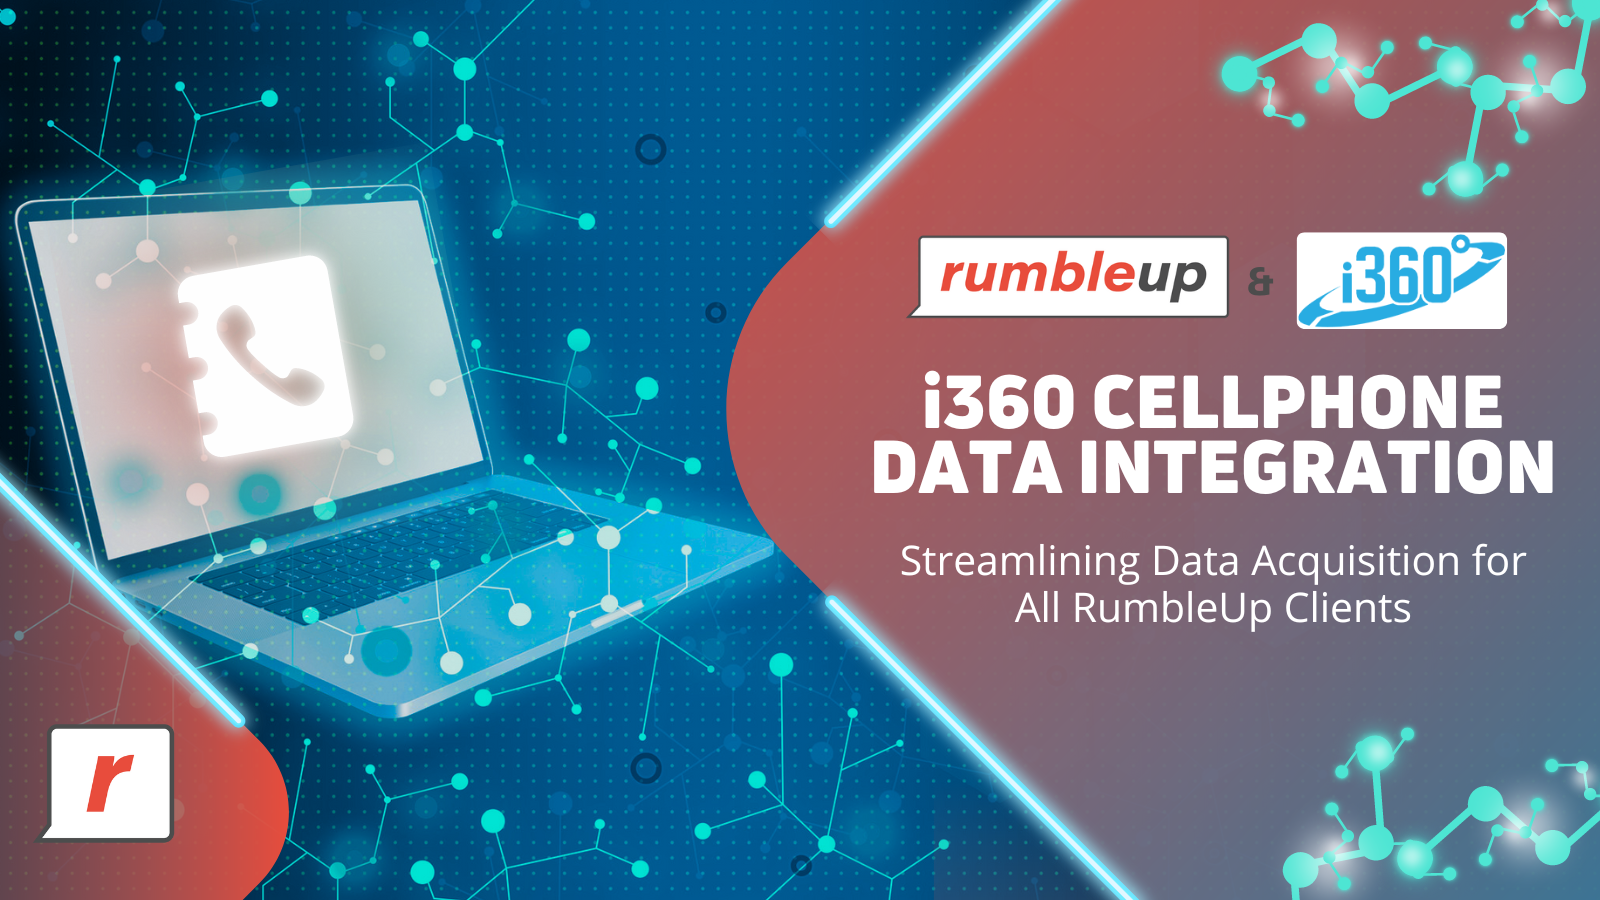 Introducing Our New i360 Data Integration - Streamlining Data Acquisition for All RumbleUp Clients